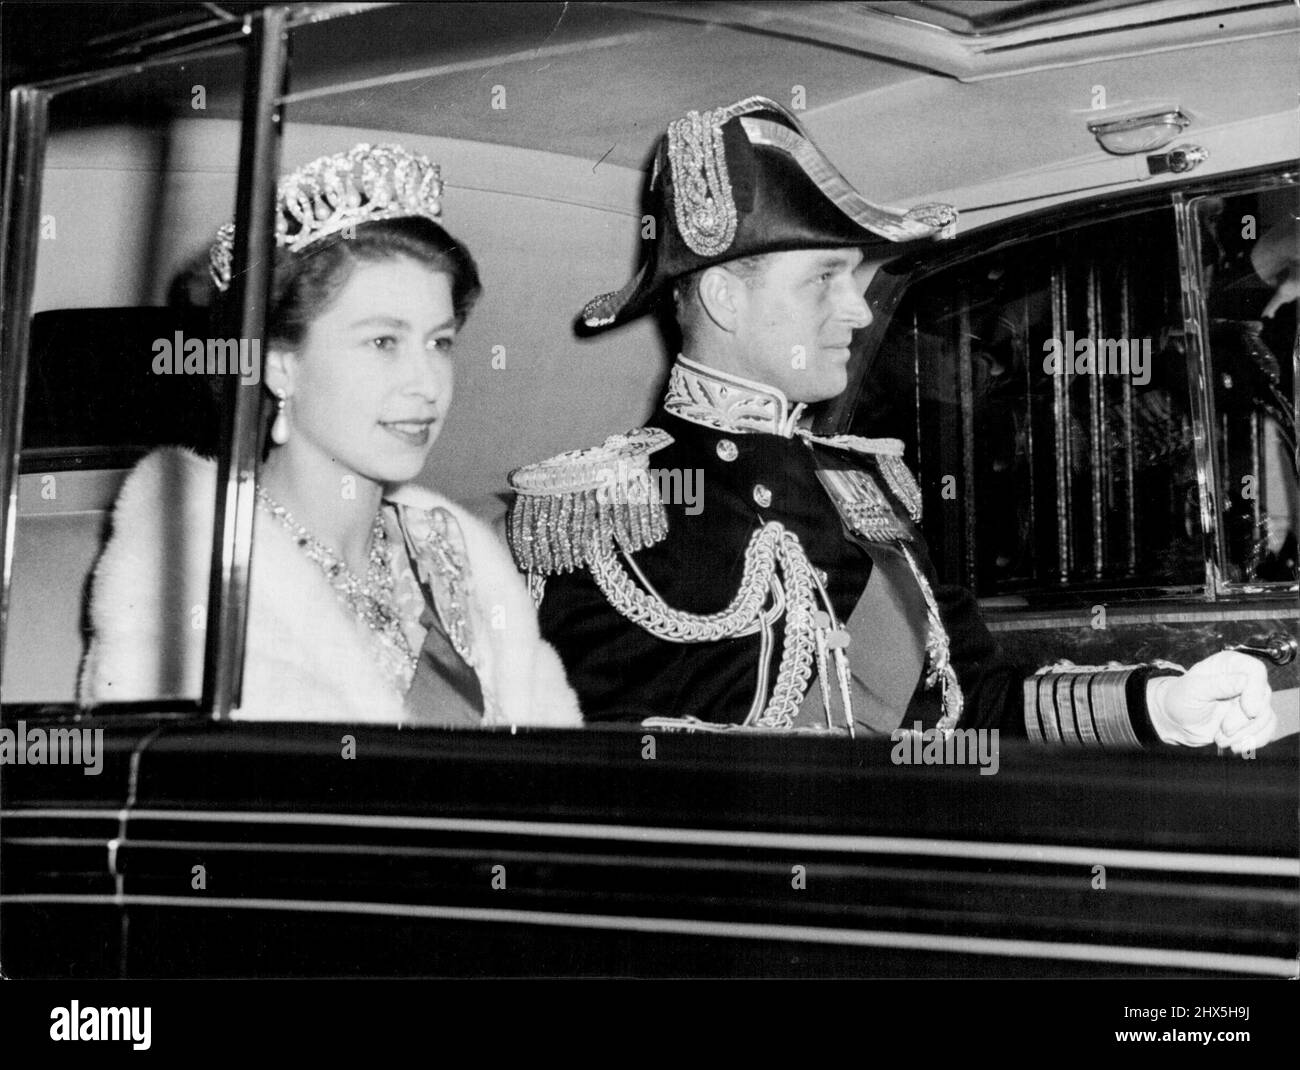 Duke Wears His Admiral's Cocked Hat - Drive From Palace With Queen The Queen and the Duke of Edinburgh, who wears his Admiral's cocked hat, drive from Buckhingham Palace to-night (Friday) to attend the dinner given by the Prime Minister at Lancaster House, St. James, London. June 5, 1953. (Photo by Reuterphoto). Stock Photo